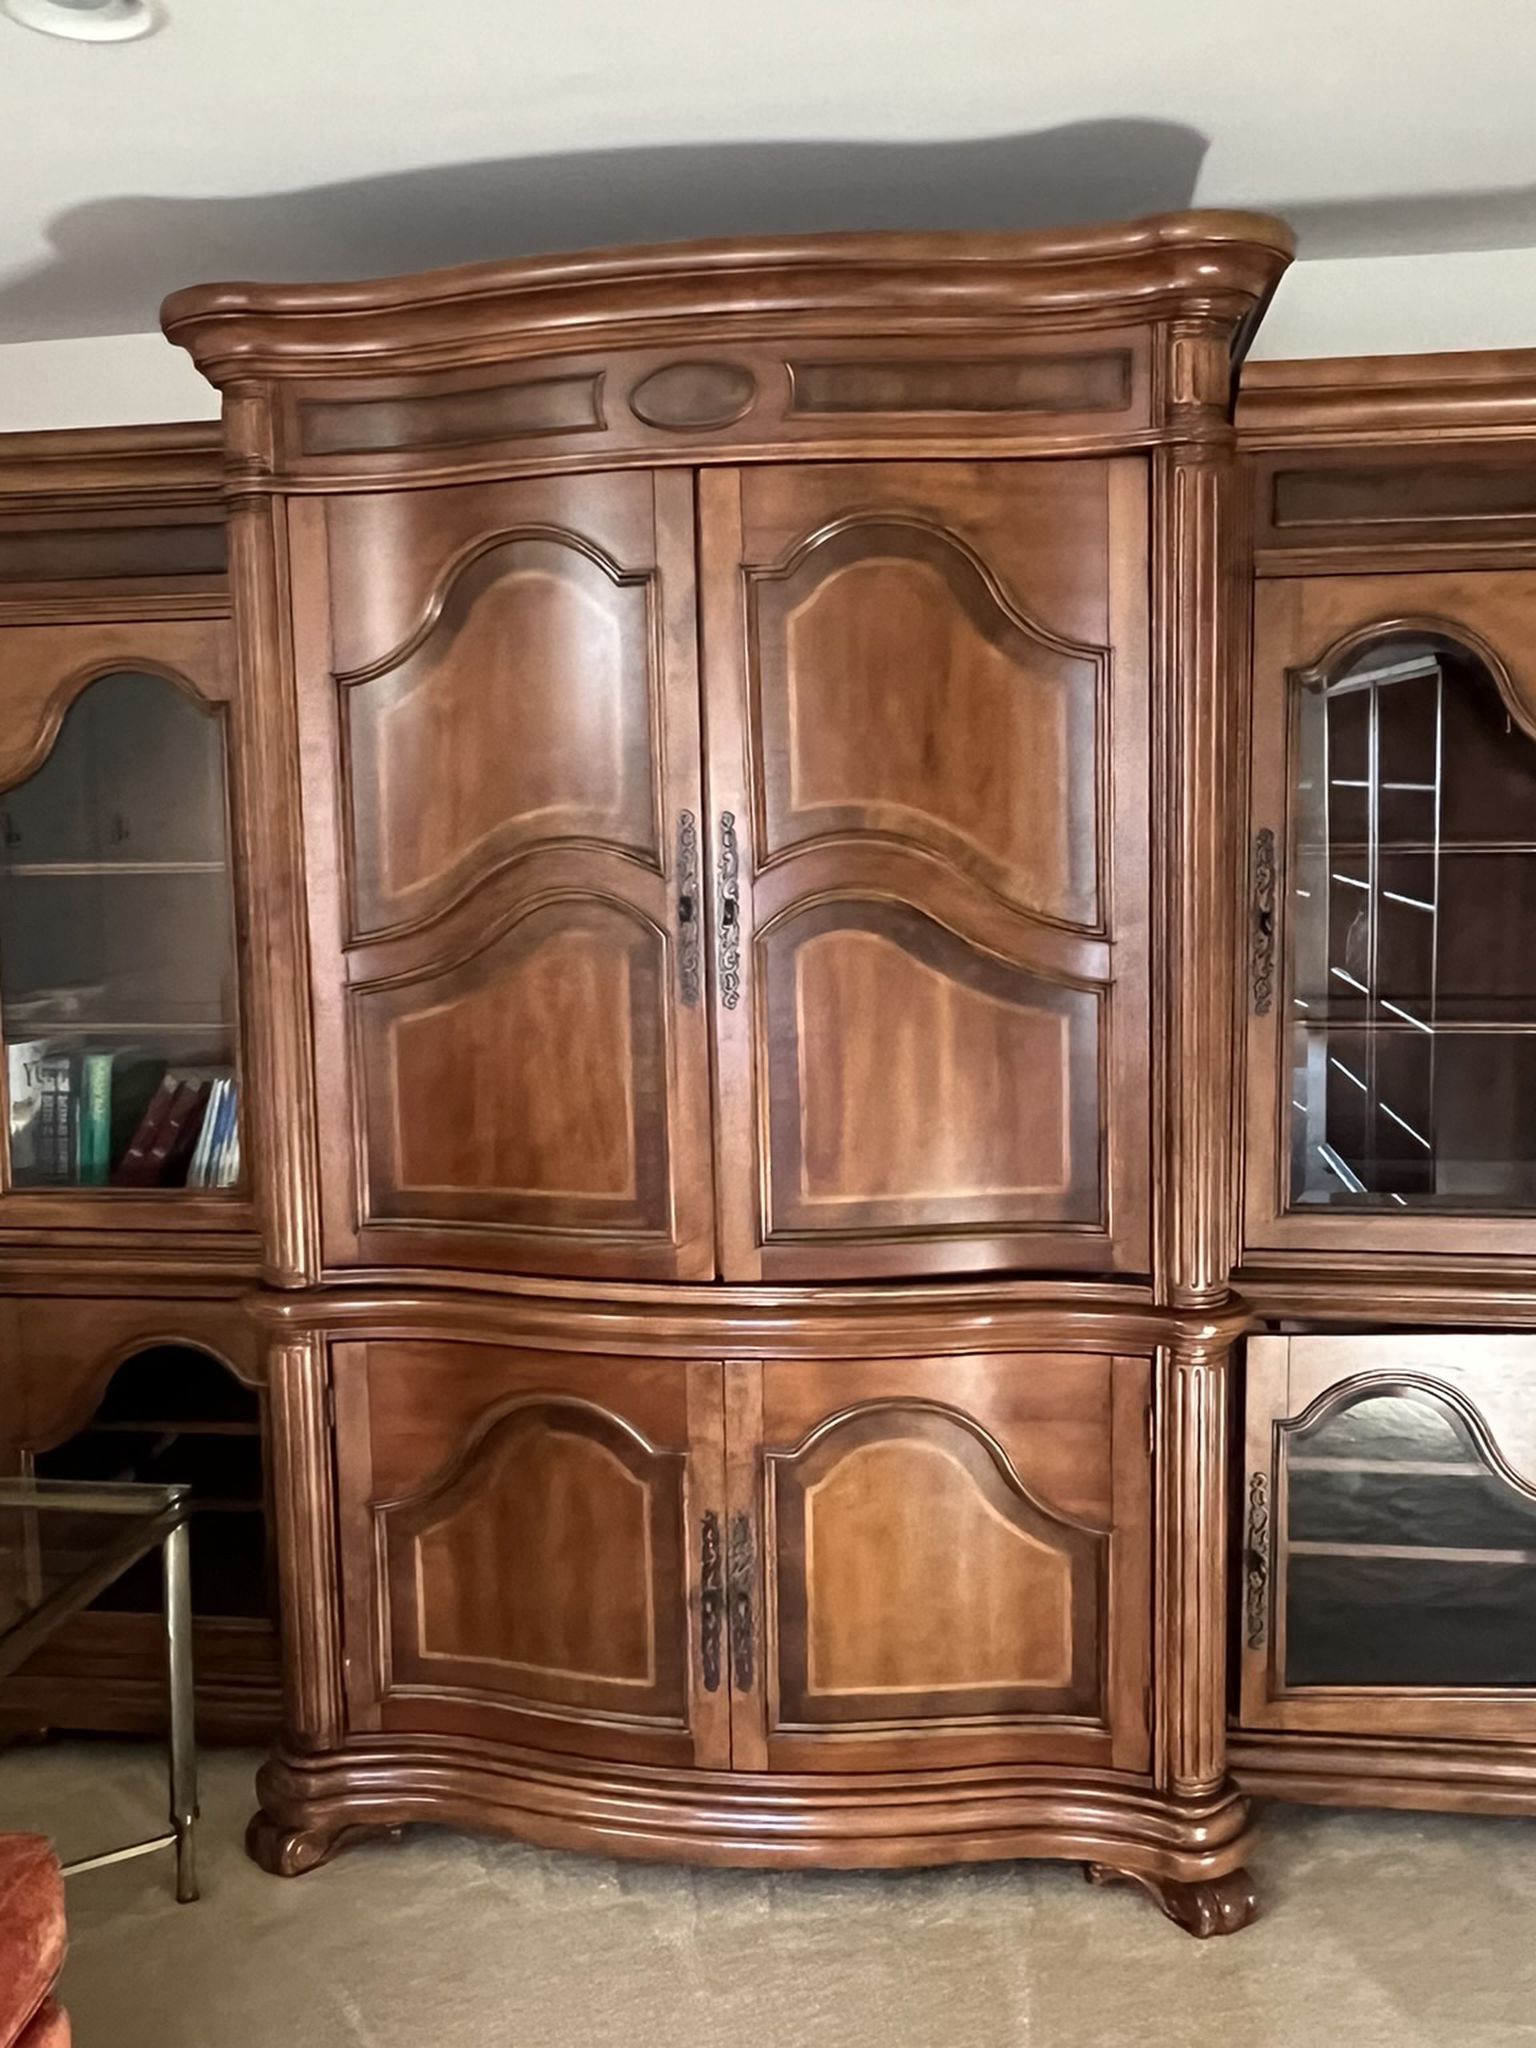 TV Armoire And Shelves